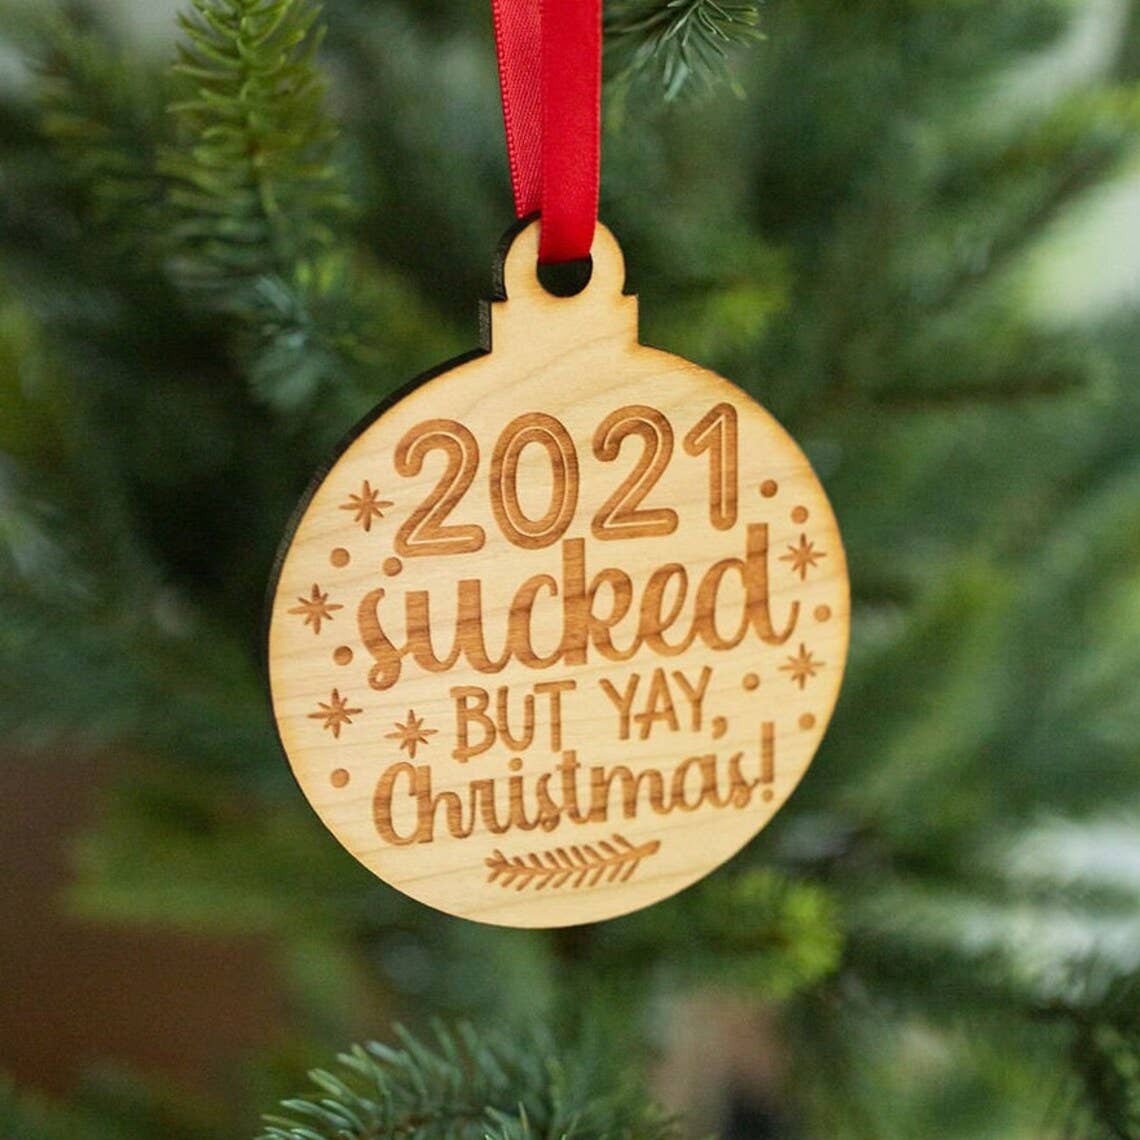 2021 Sucked But Yay Christmas Ornament